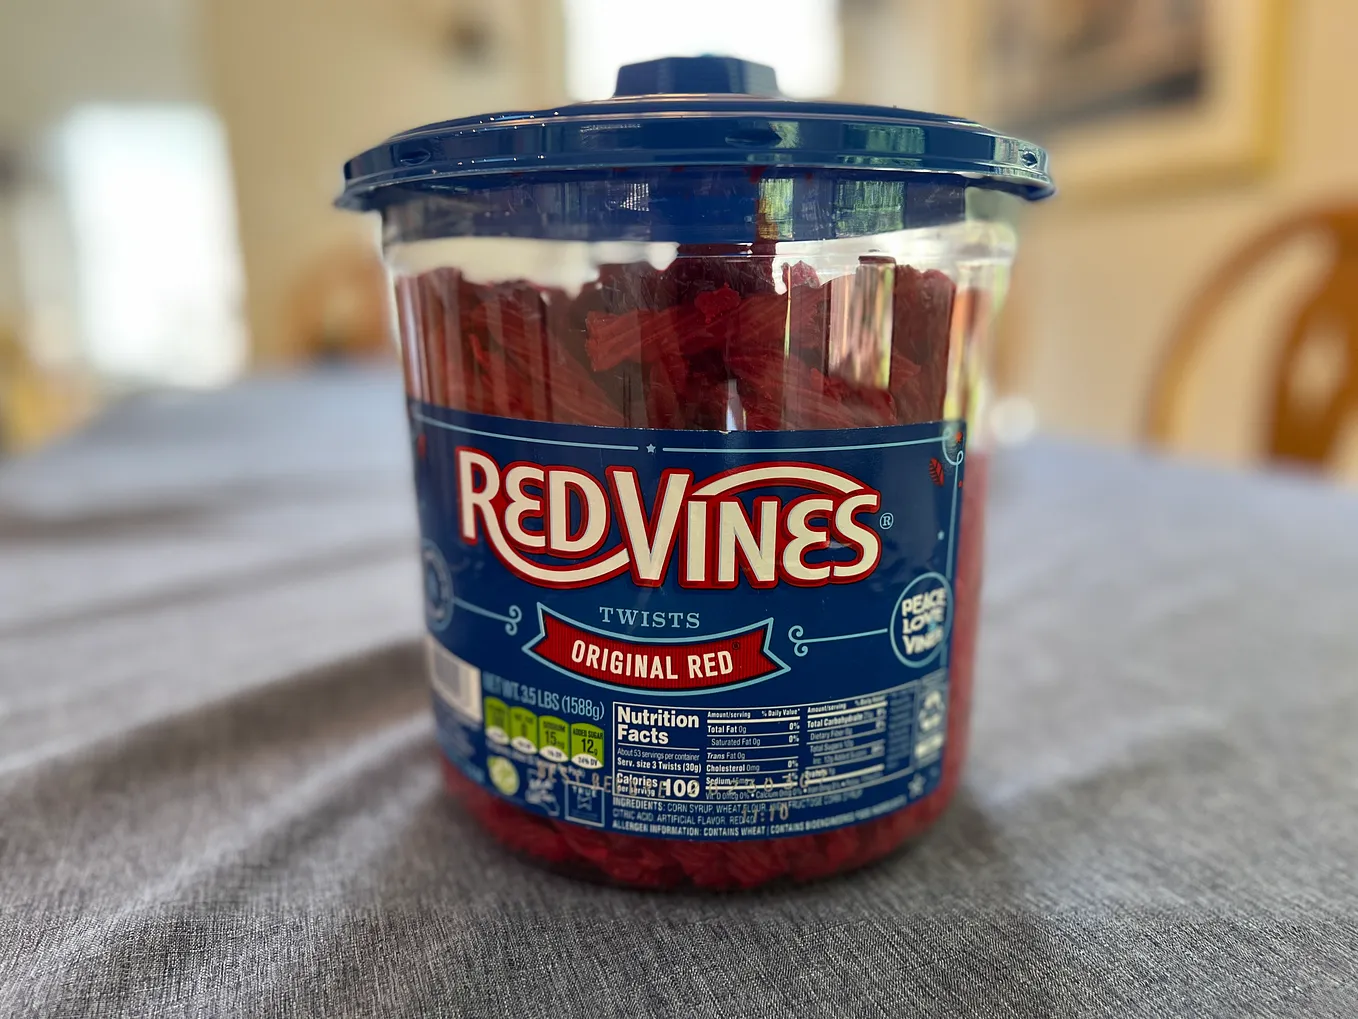 What Flavor Are Red Vines?